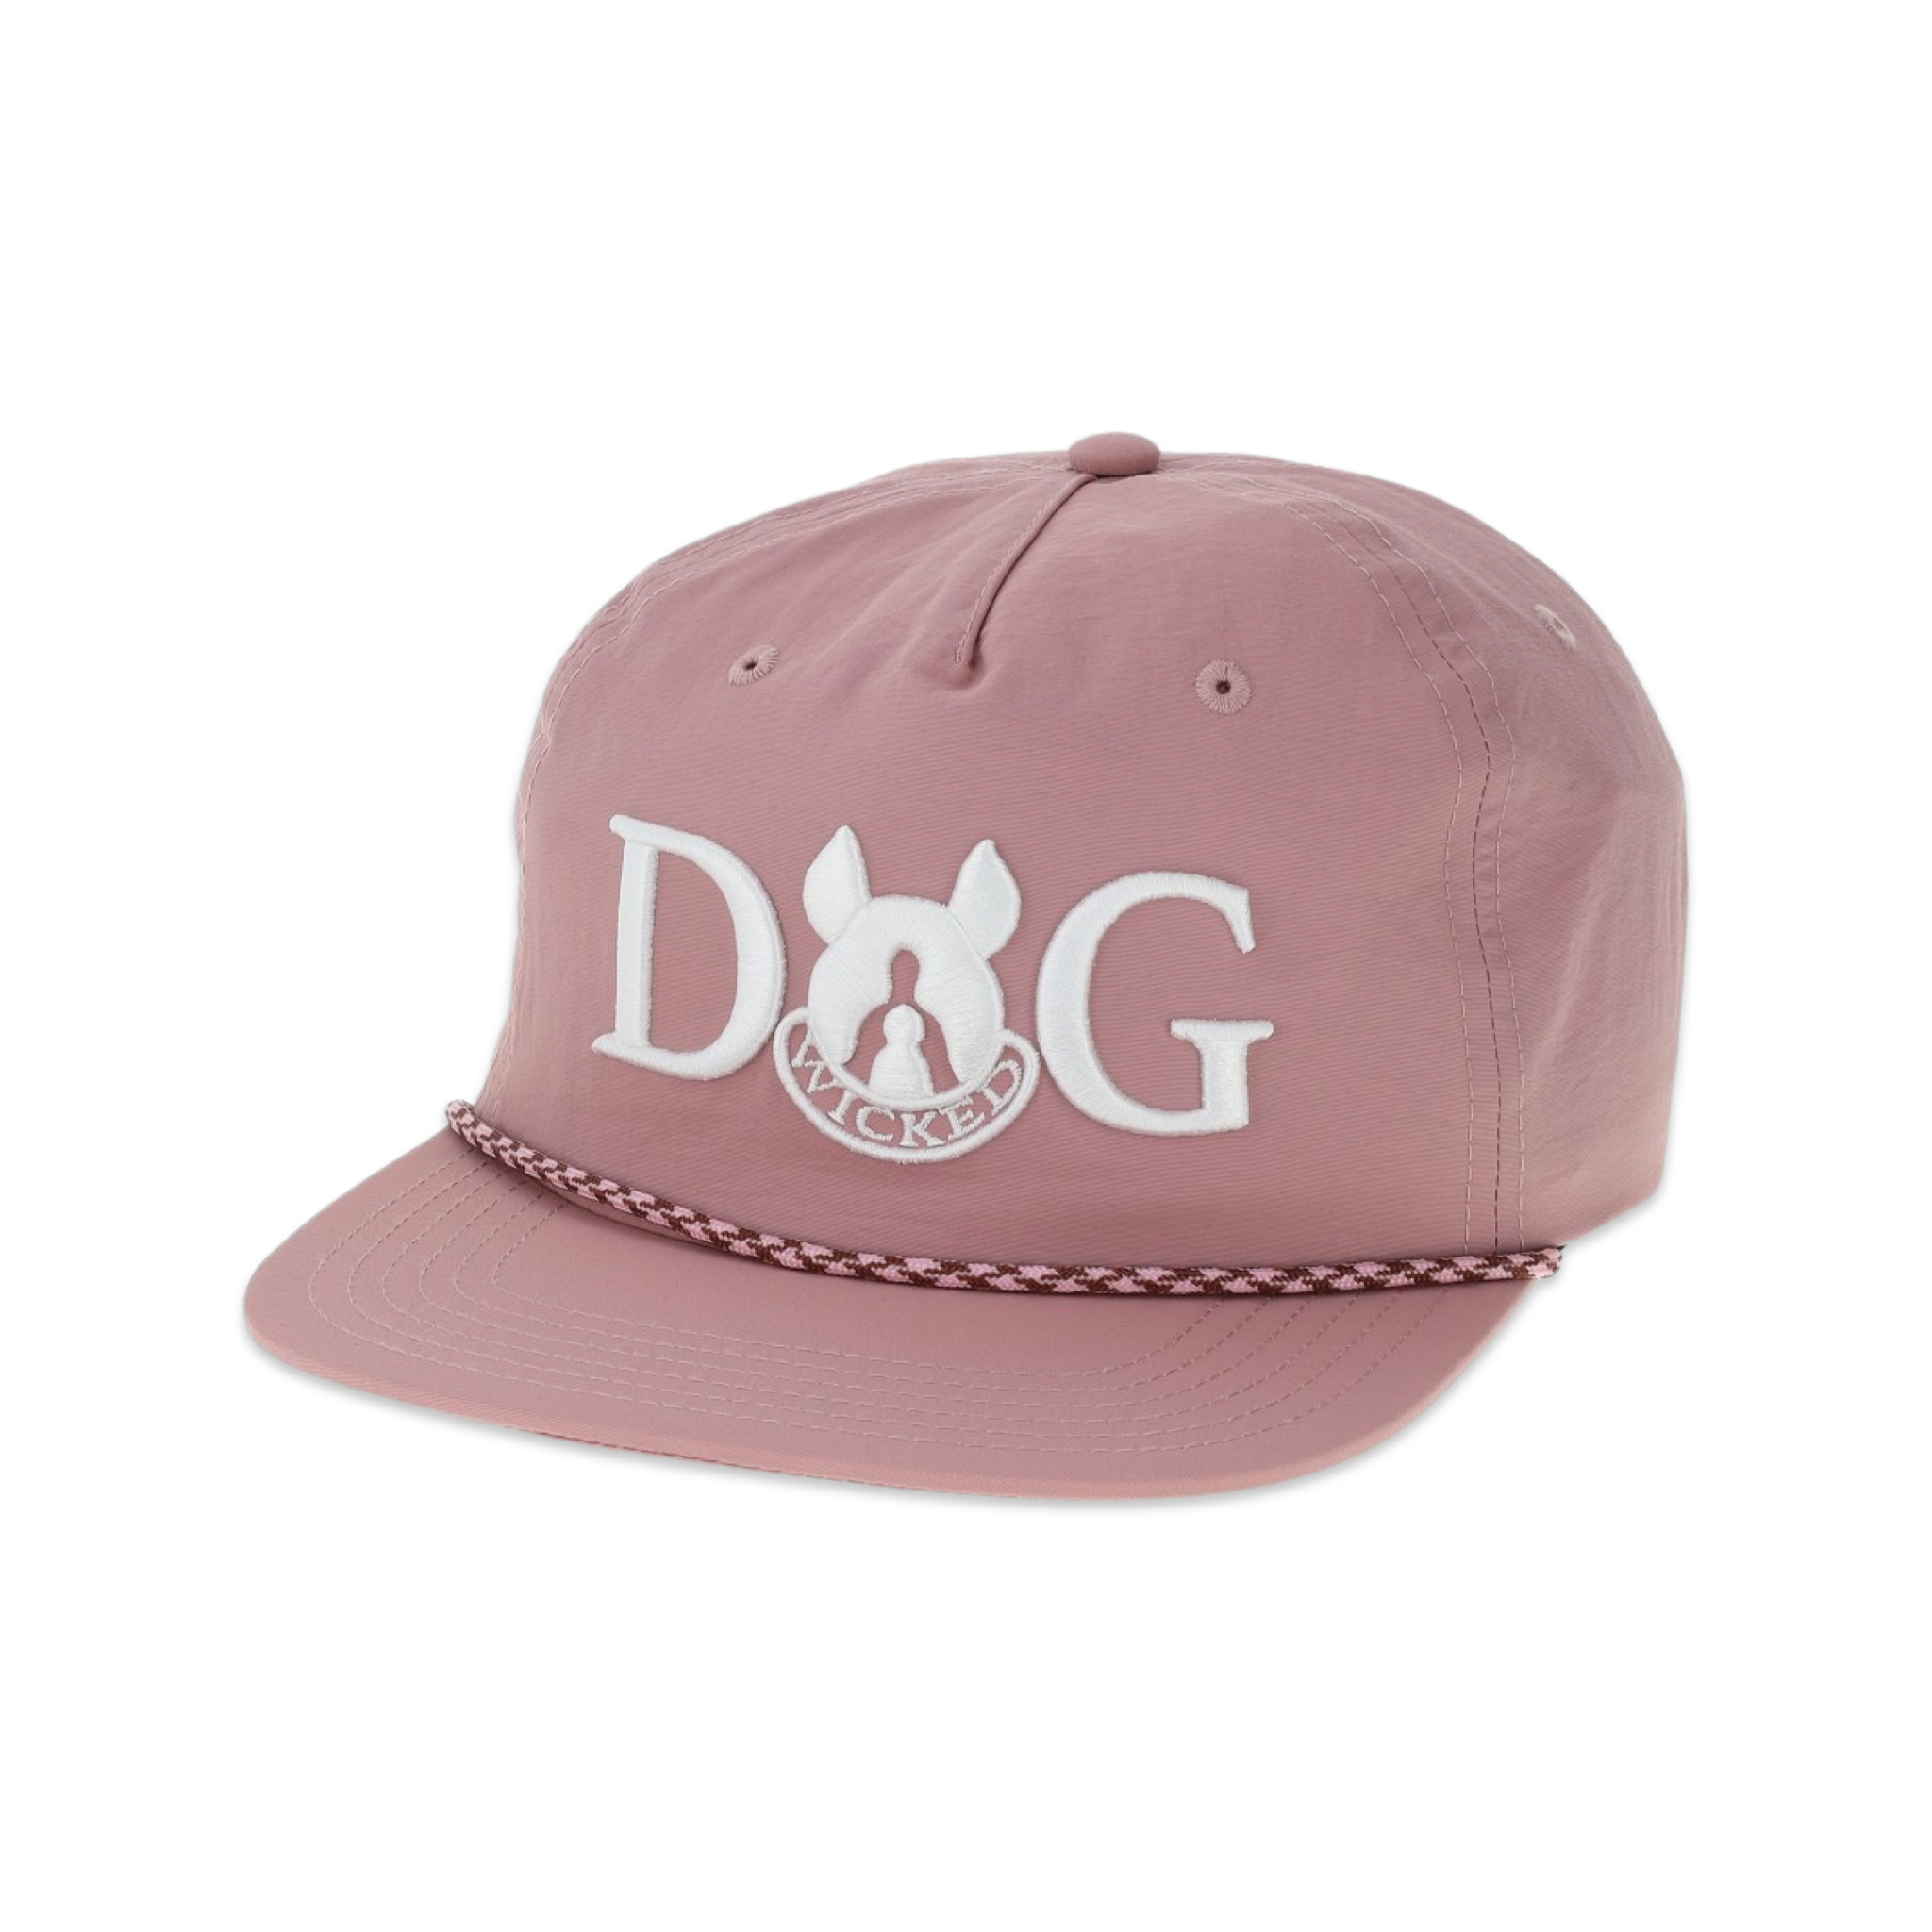 Dog Wicked Snapback – Dusty Rose Chill